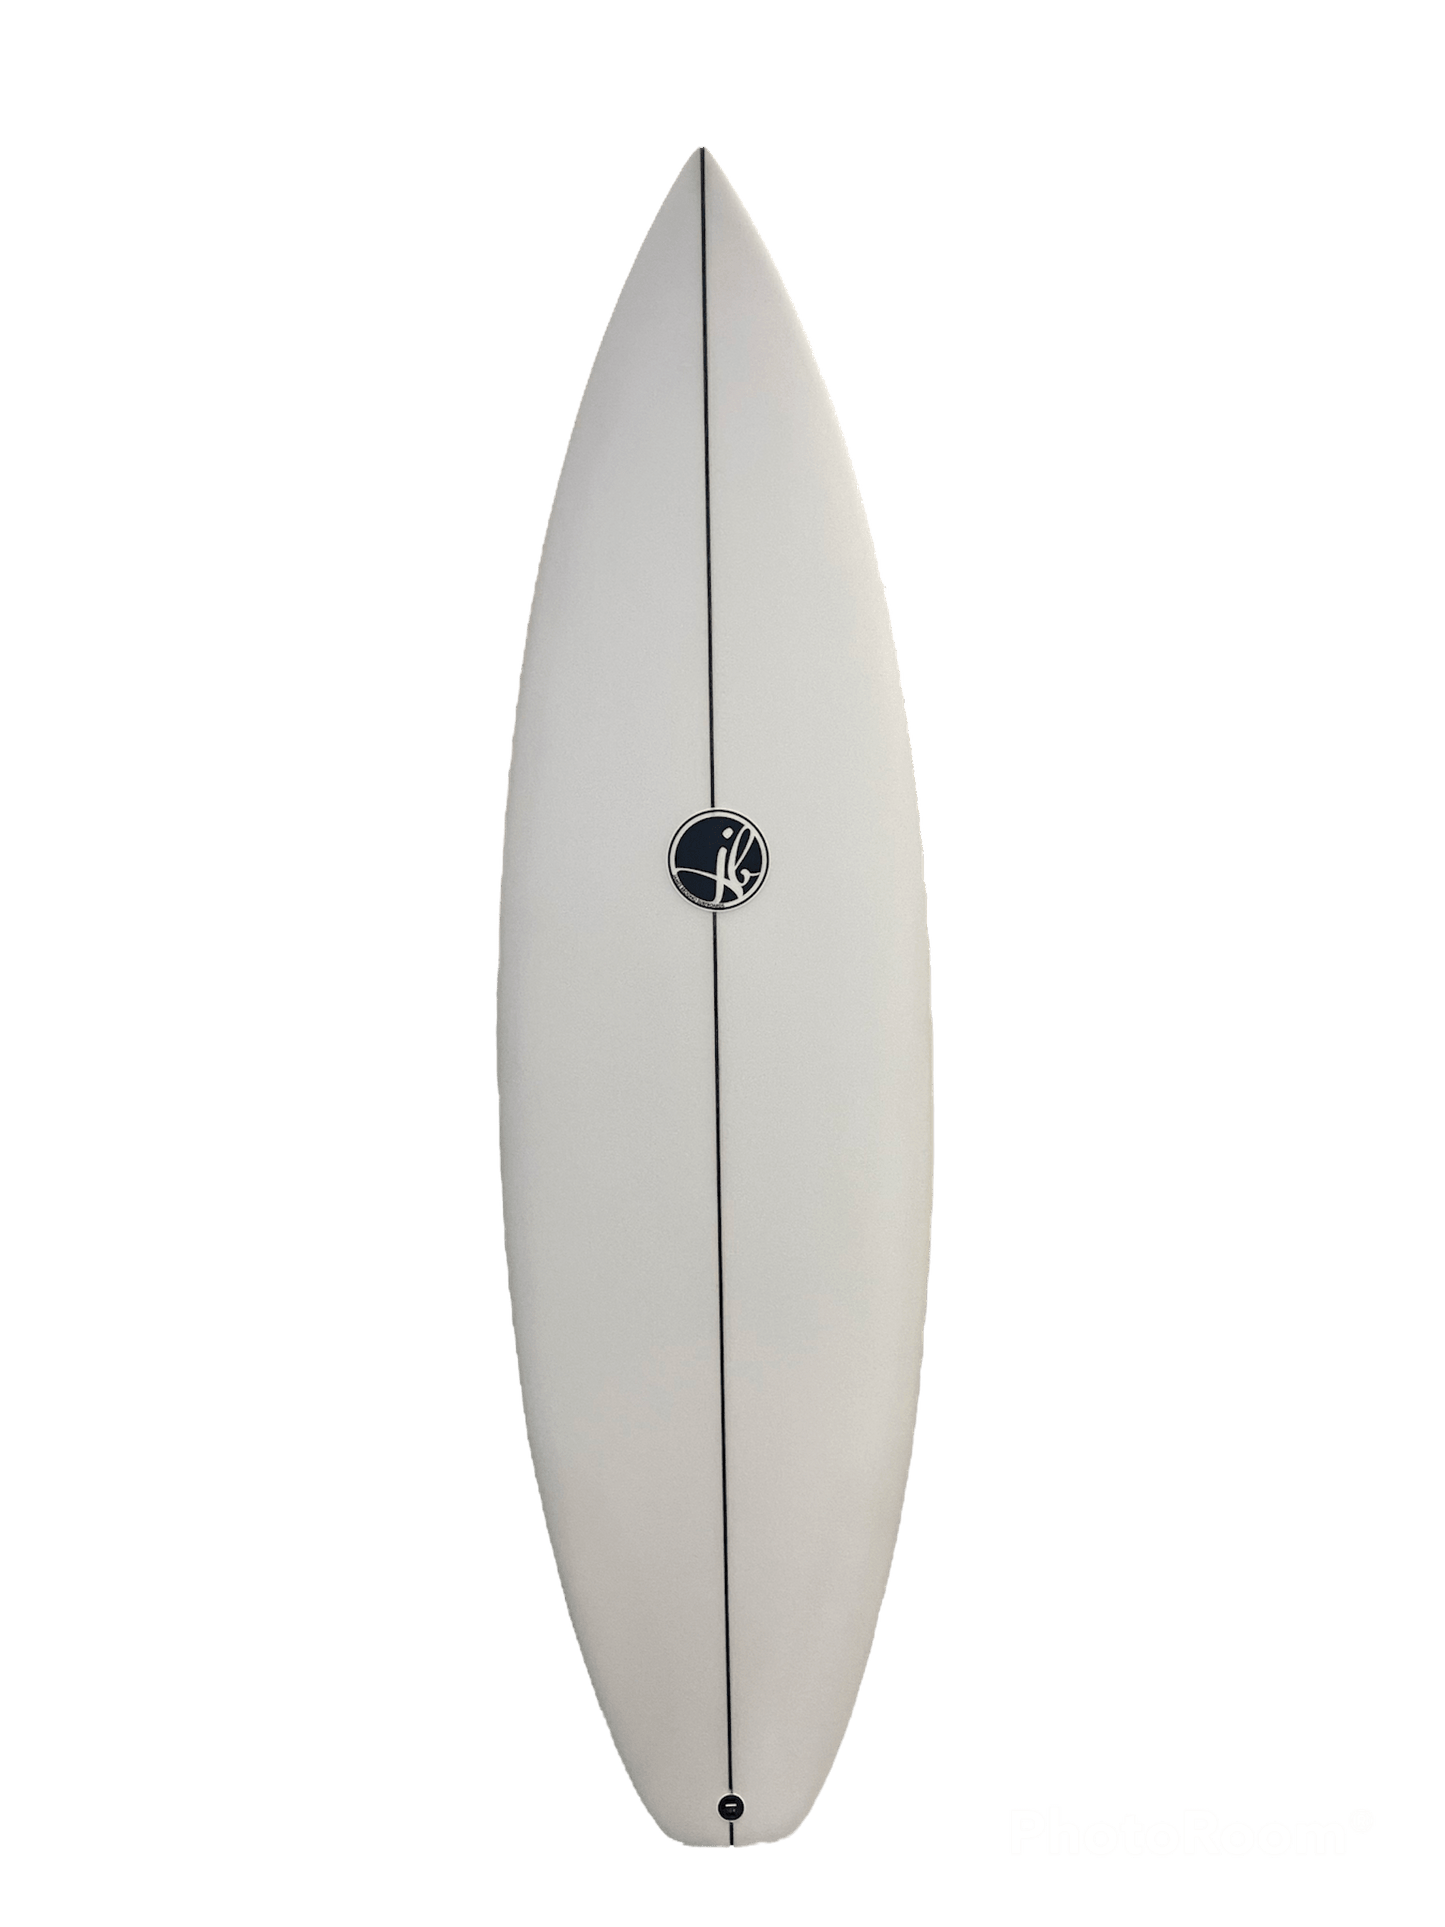 5'3 Muzzy Squash Tail Short Board Surfboards